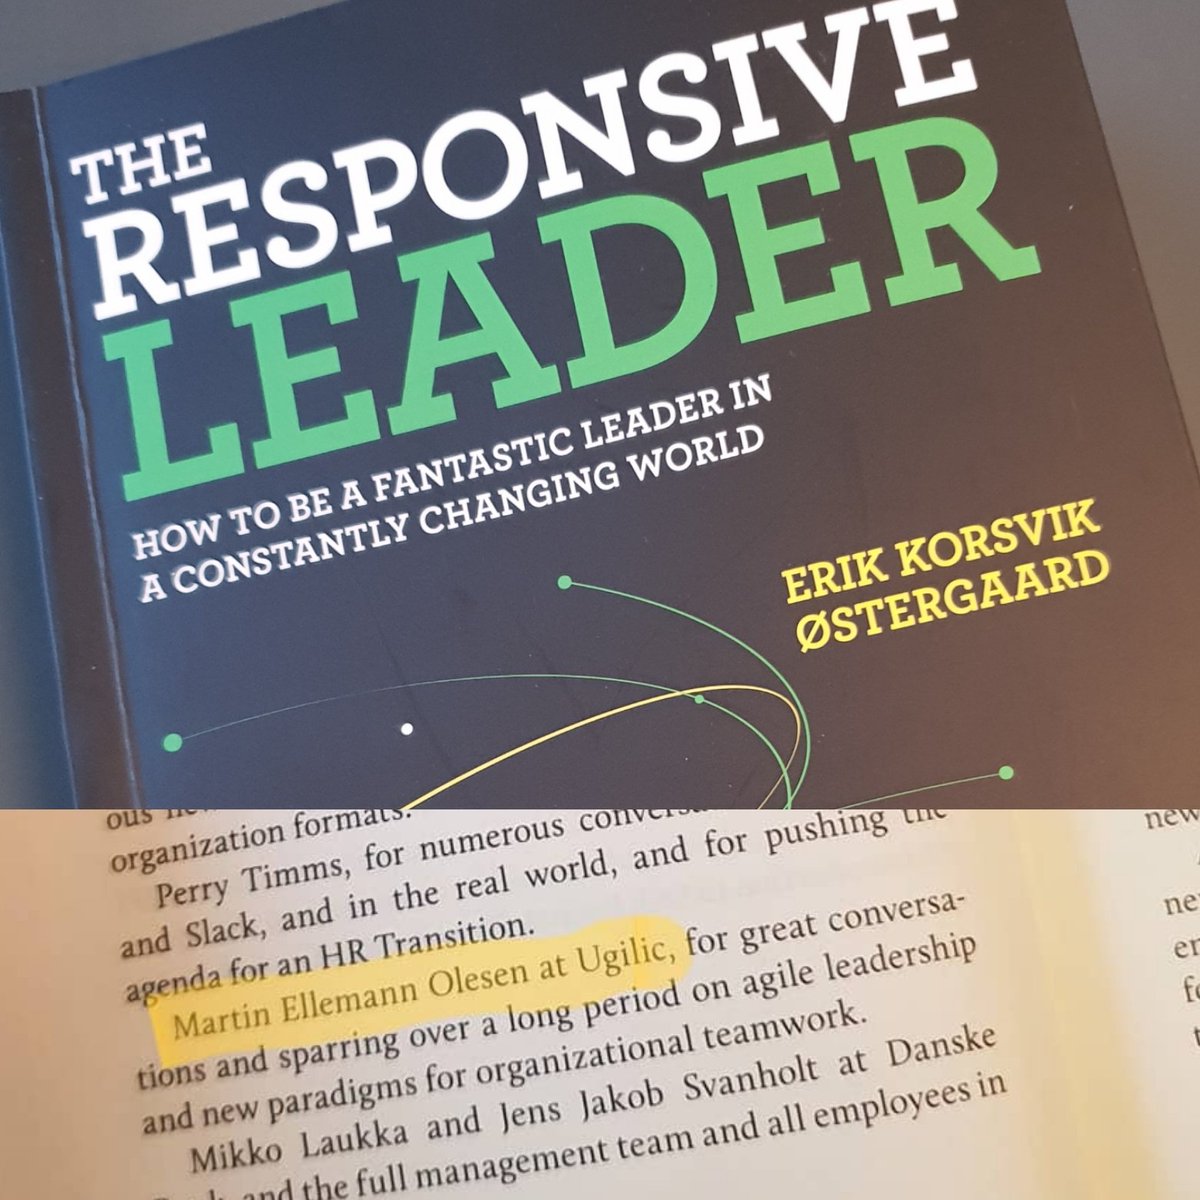 I'm very humbled about being acknowledged in such a great book on Leadership by @ErikQstergaard 🙏 recommended read for leaders at all levels #responsiveleader #agile #leadership #leadershipagility #management #leadershipdevelopment #ugilic #bookrecommendation #blochøstergaard